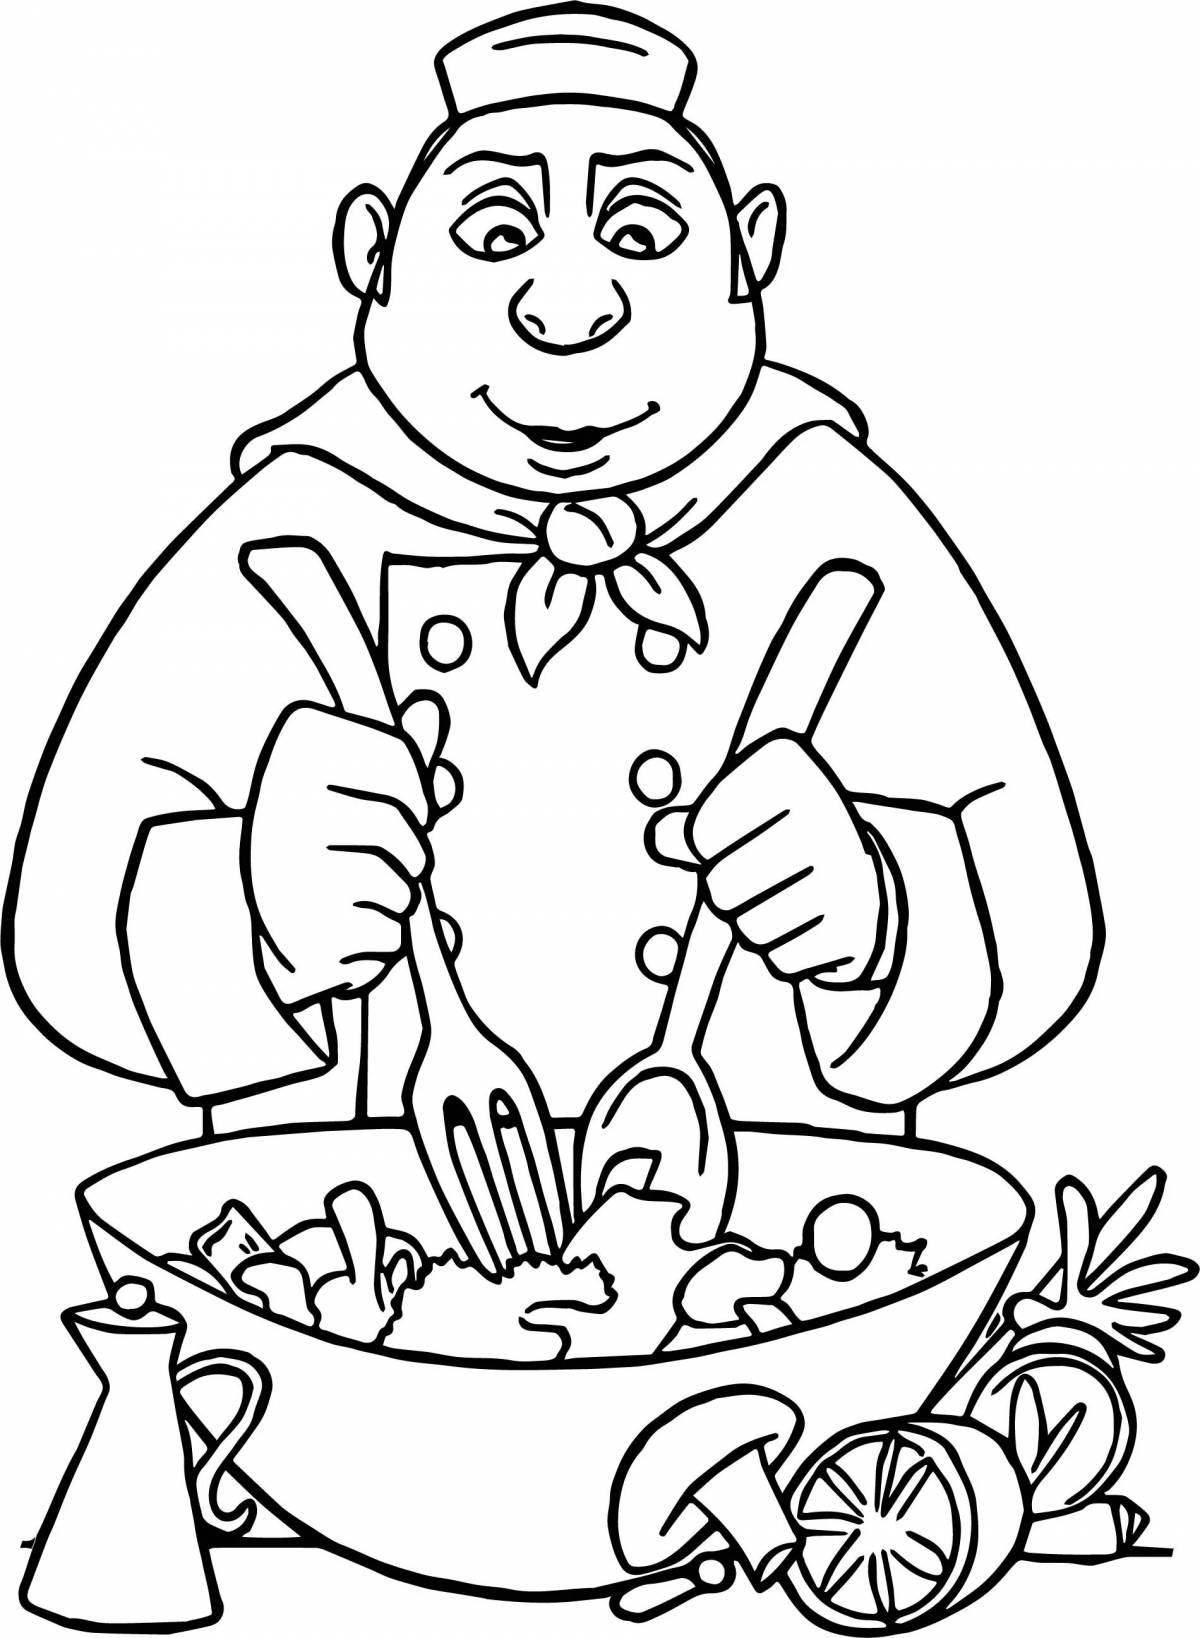 Chef funny coloring book